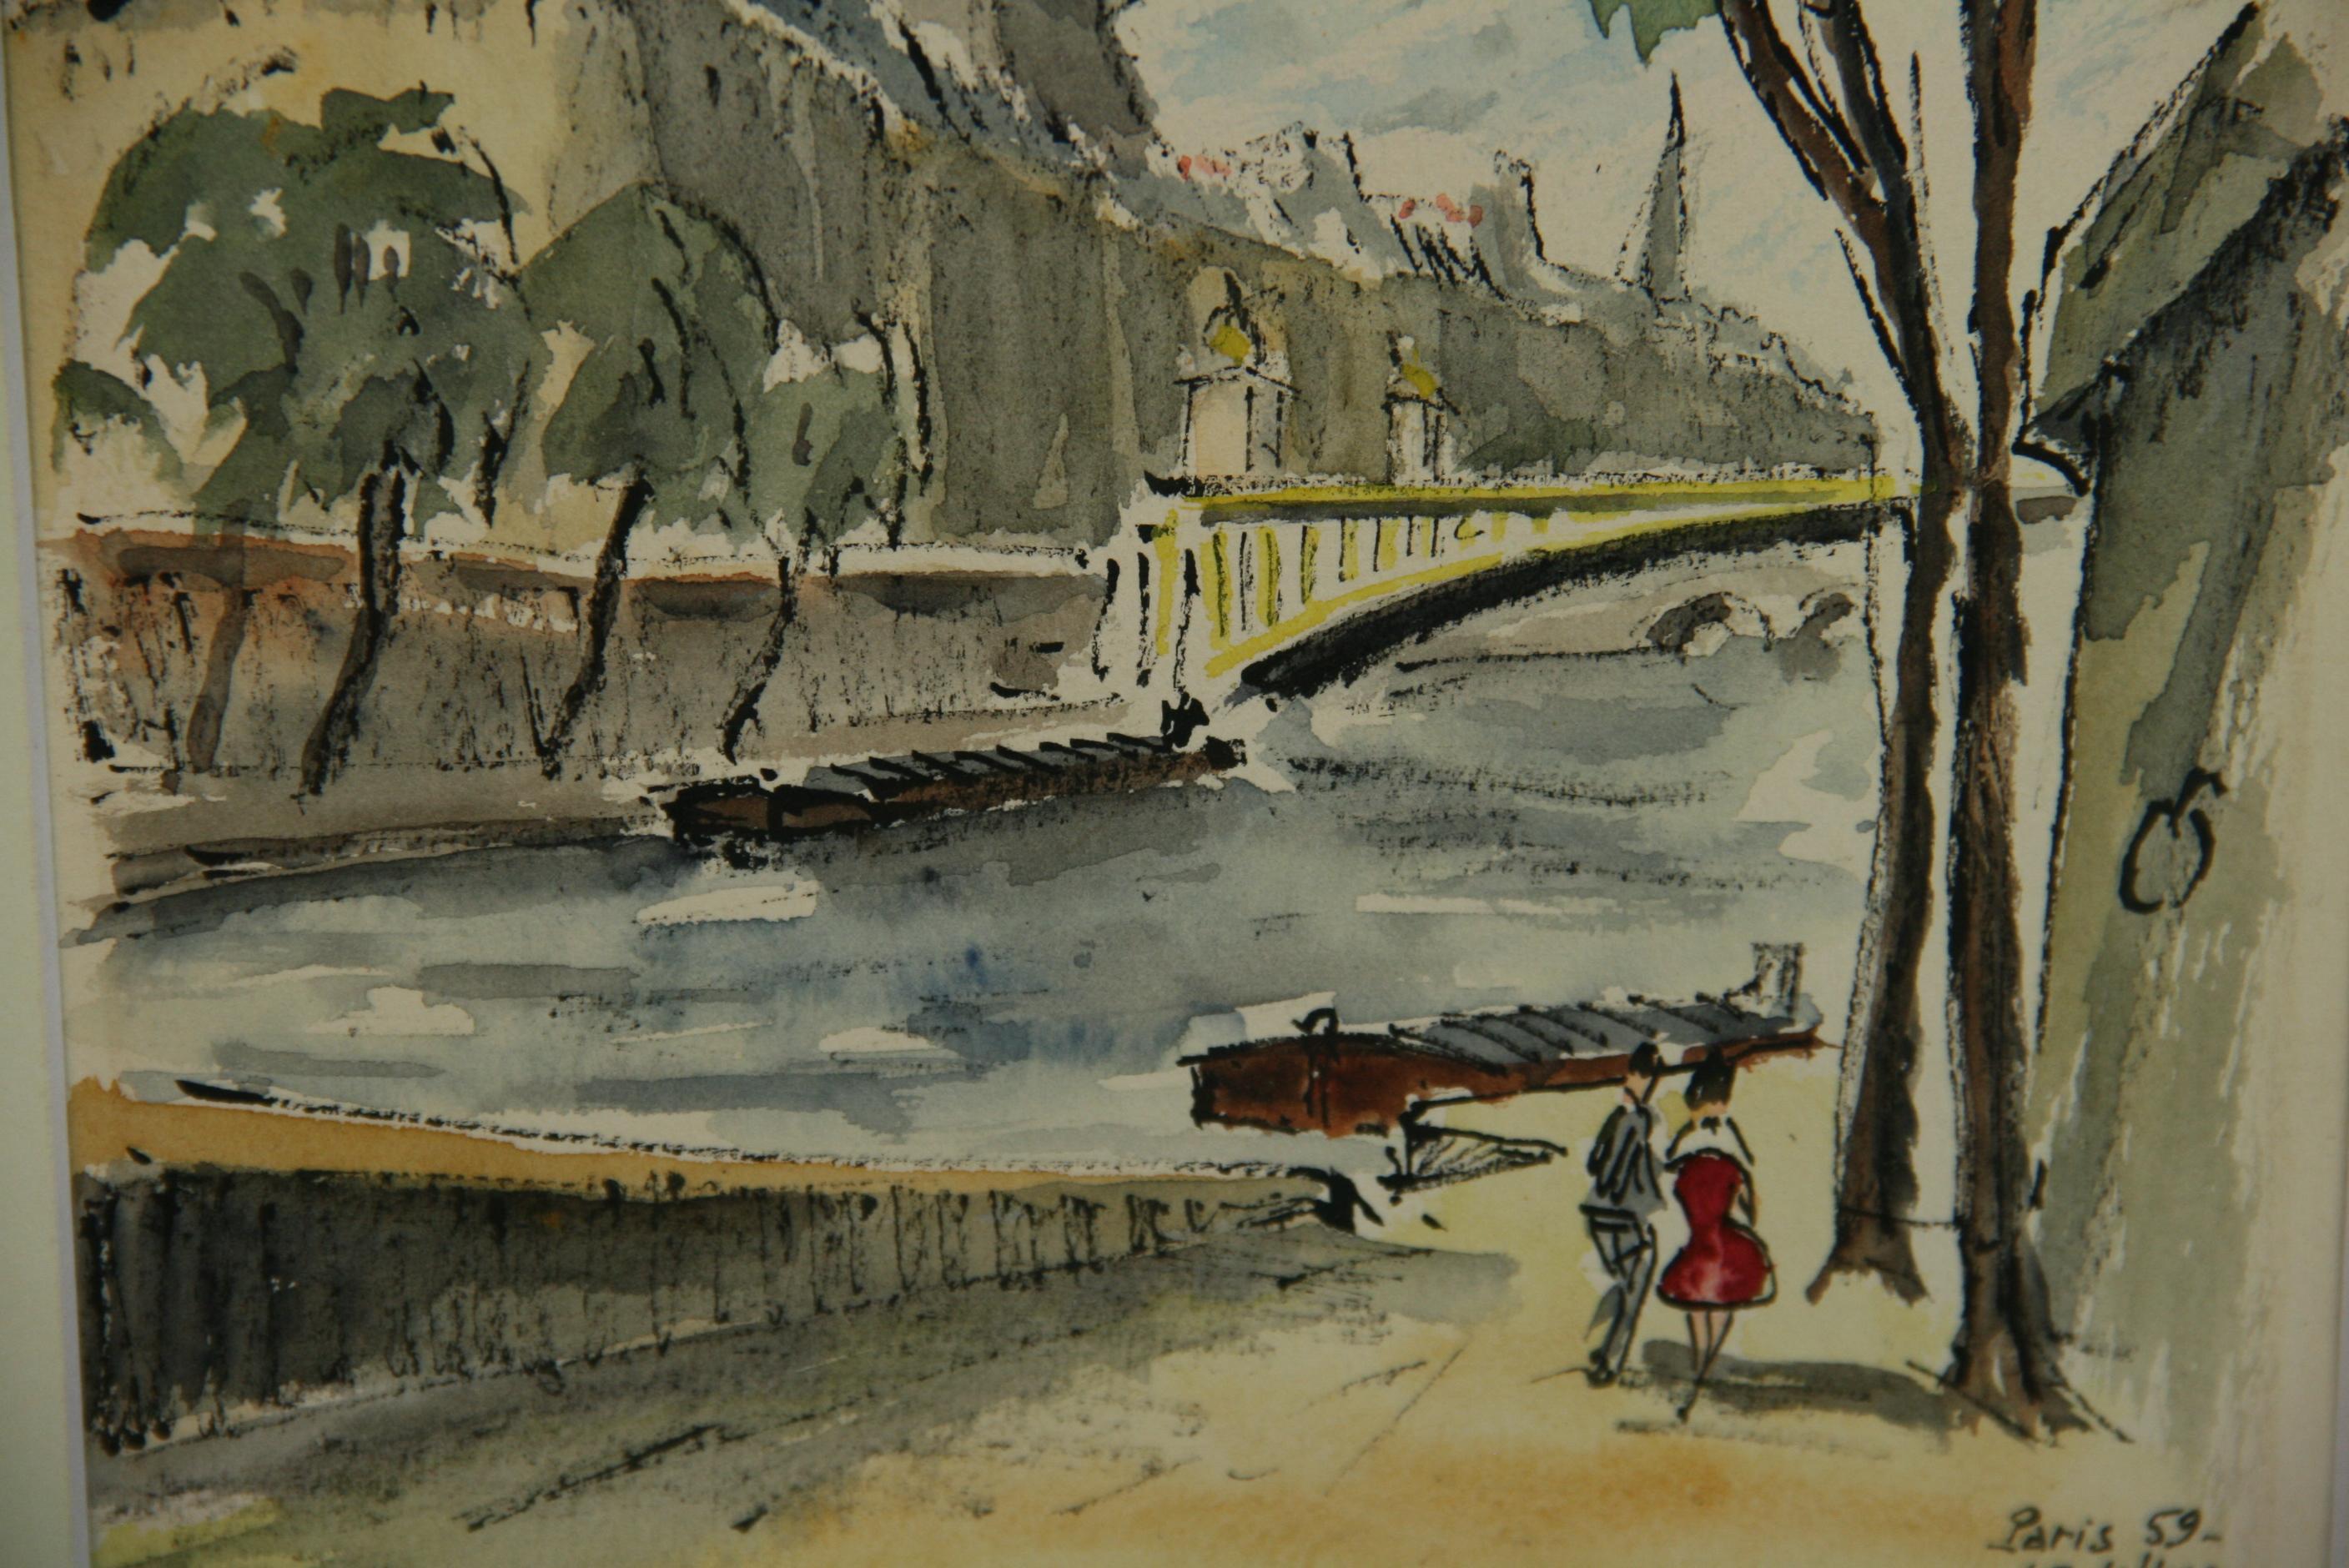 Impressionist Landscape Along The Seine in Paris painting - Brown Landscape Painting by Unknown